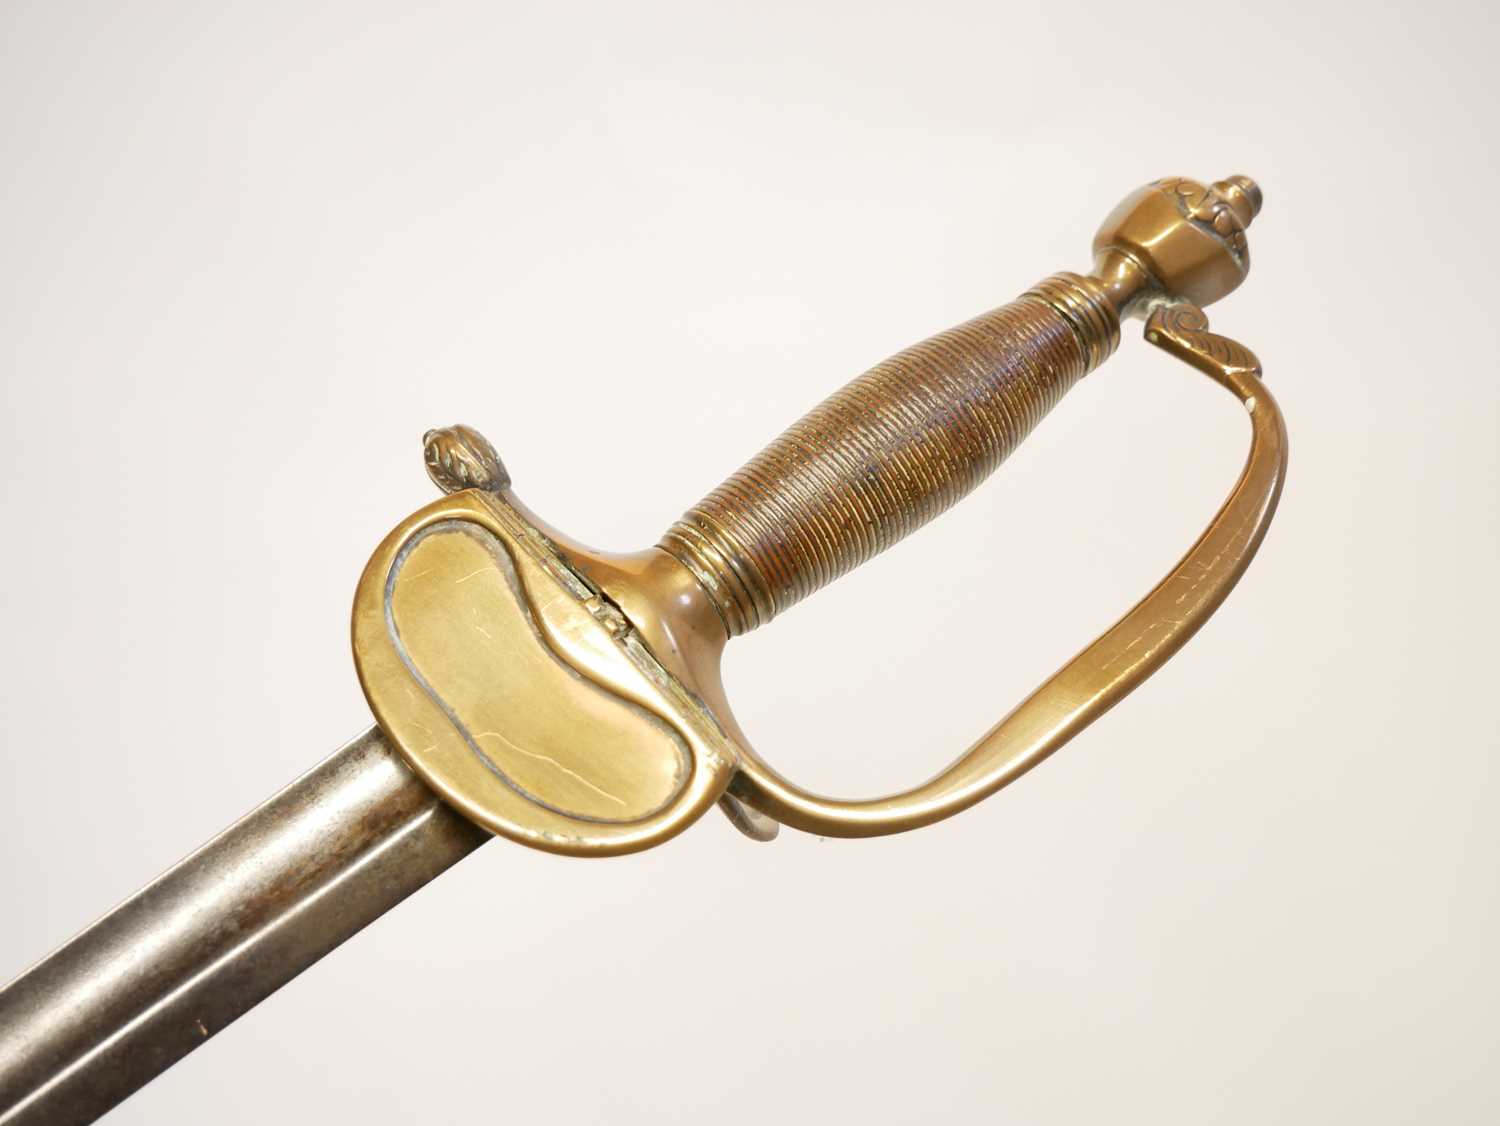 1796 pattern infantry officers sword, 32inch fullered blade, wire bound grip and folding guard. - Image 3 of 5